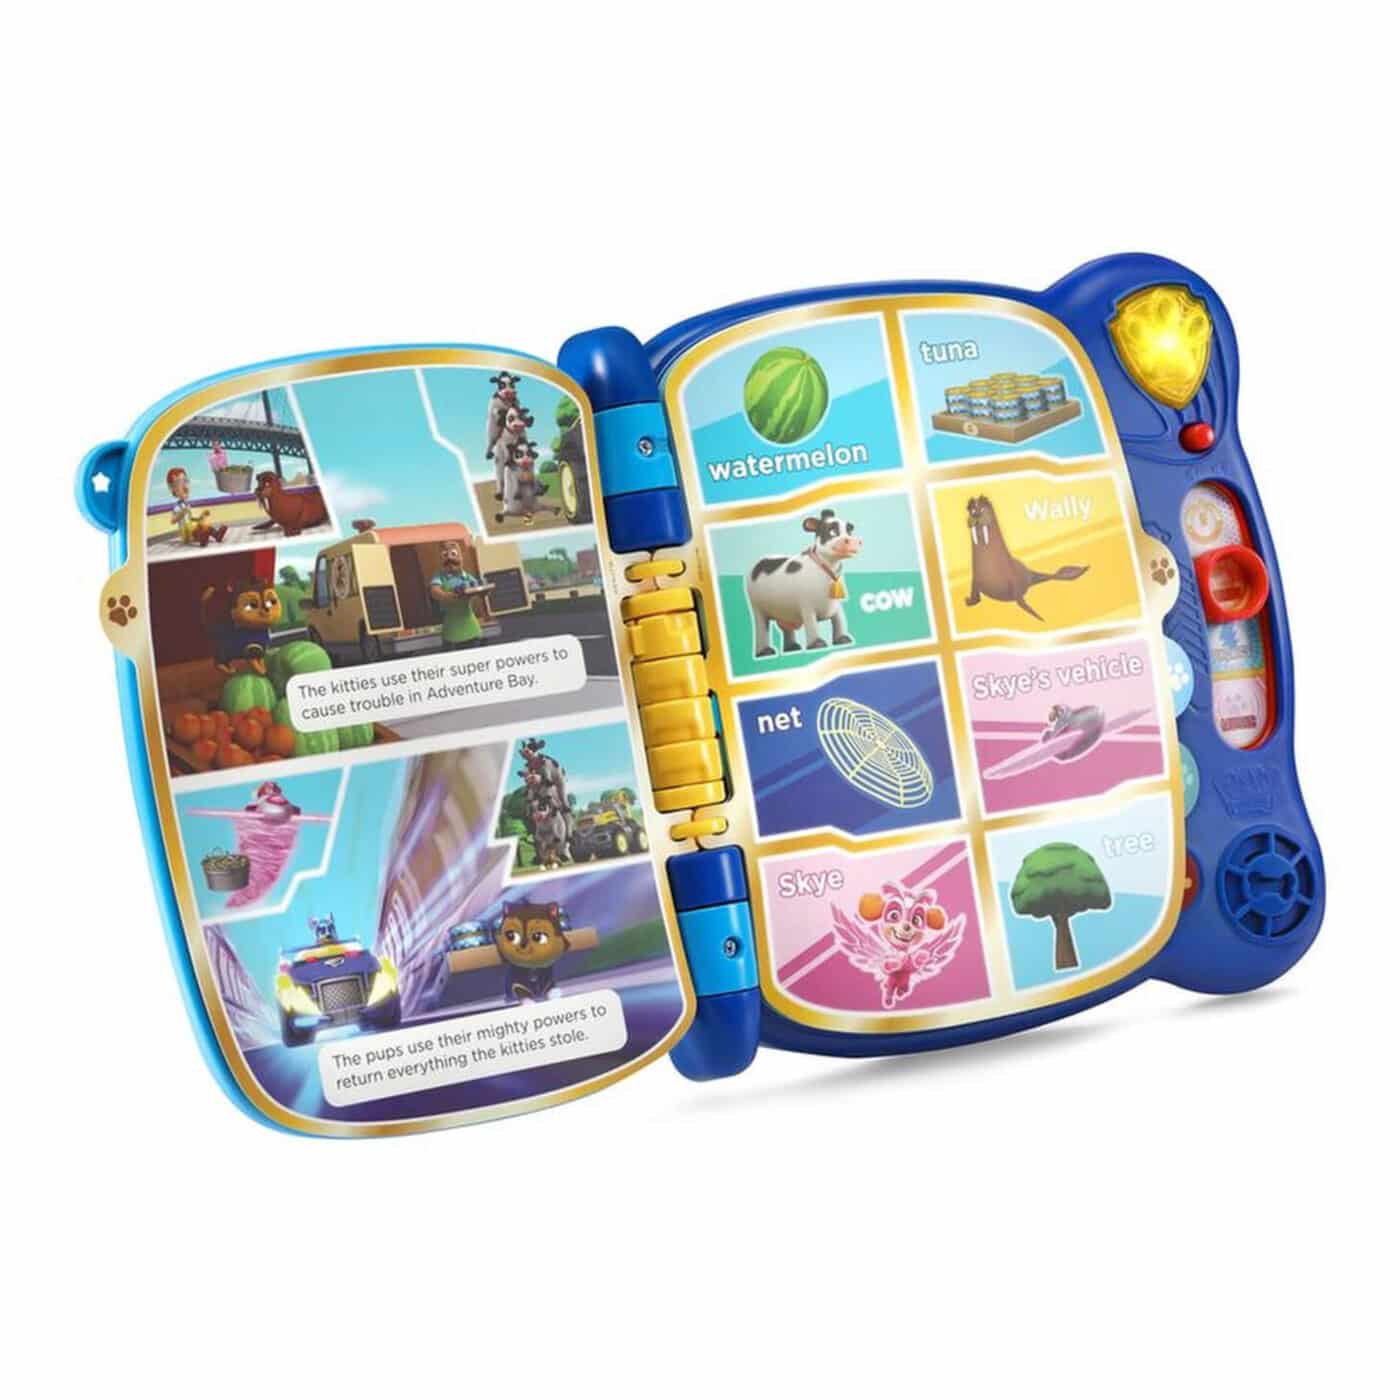 Vtech Paw Patrol Mighty Pups Touch & Teach Word Book